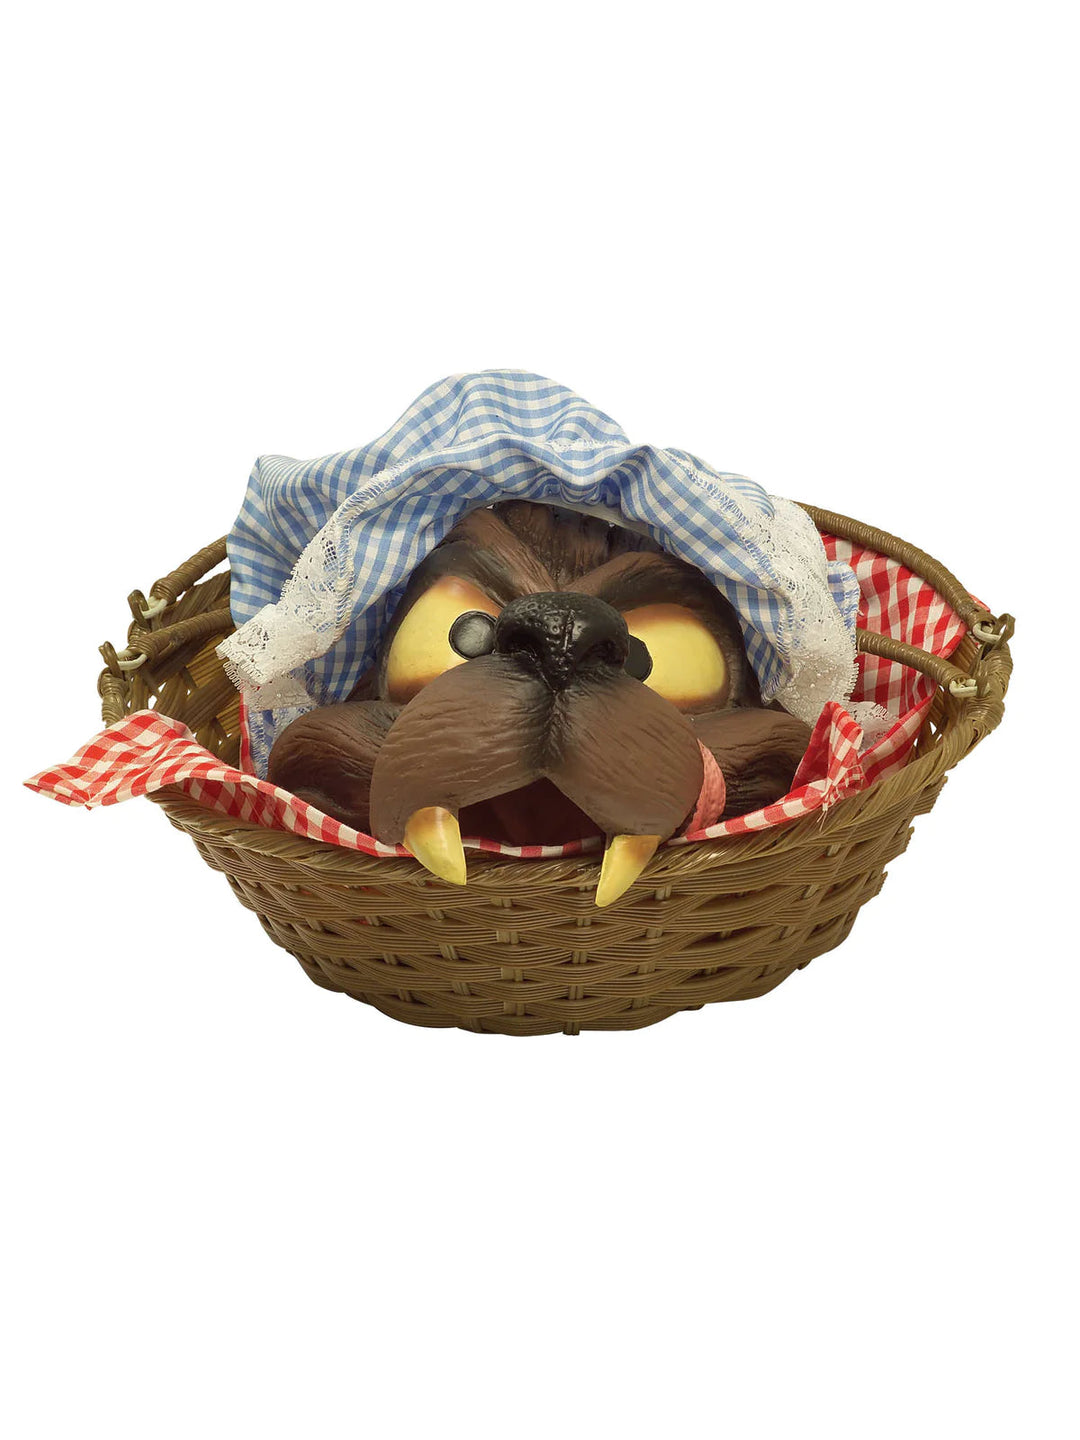 Wolf Head in Basket Red Riding Hood